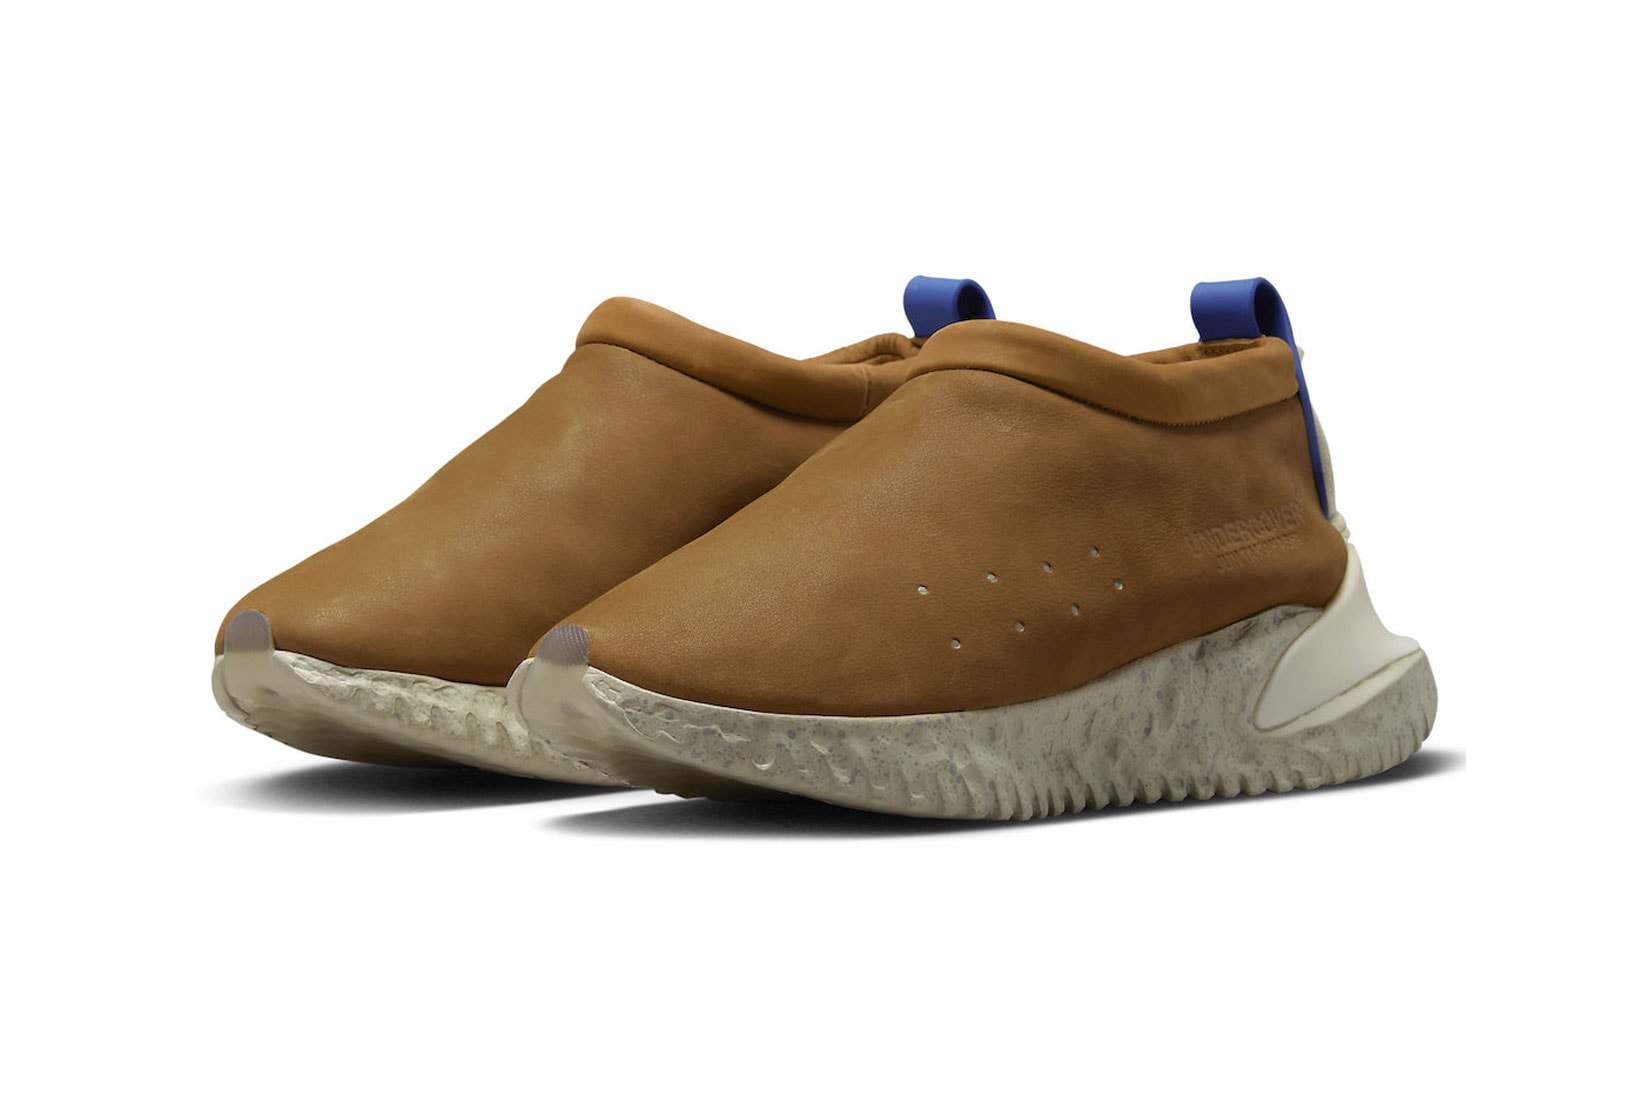 UNDERCOVER Nike Moc Flow Collaboration Jun Takahashi Black Ale Brown Team Royal Images Release Price Date 